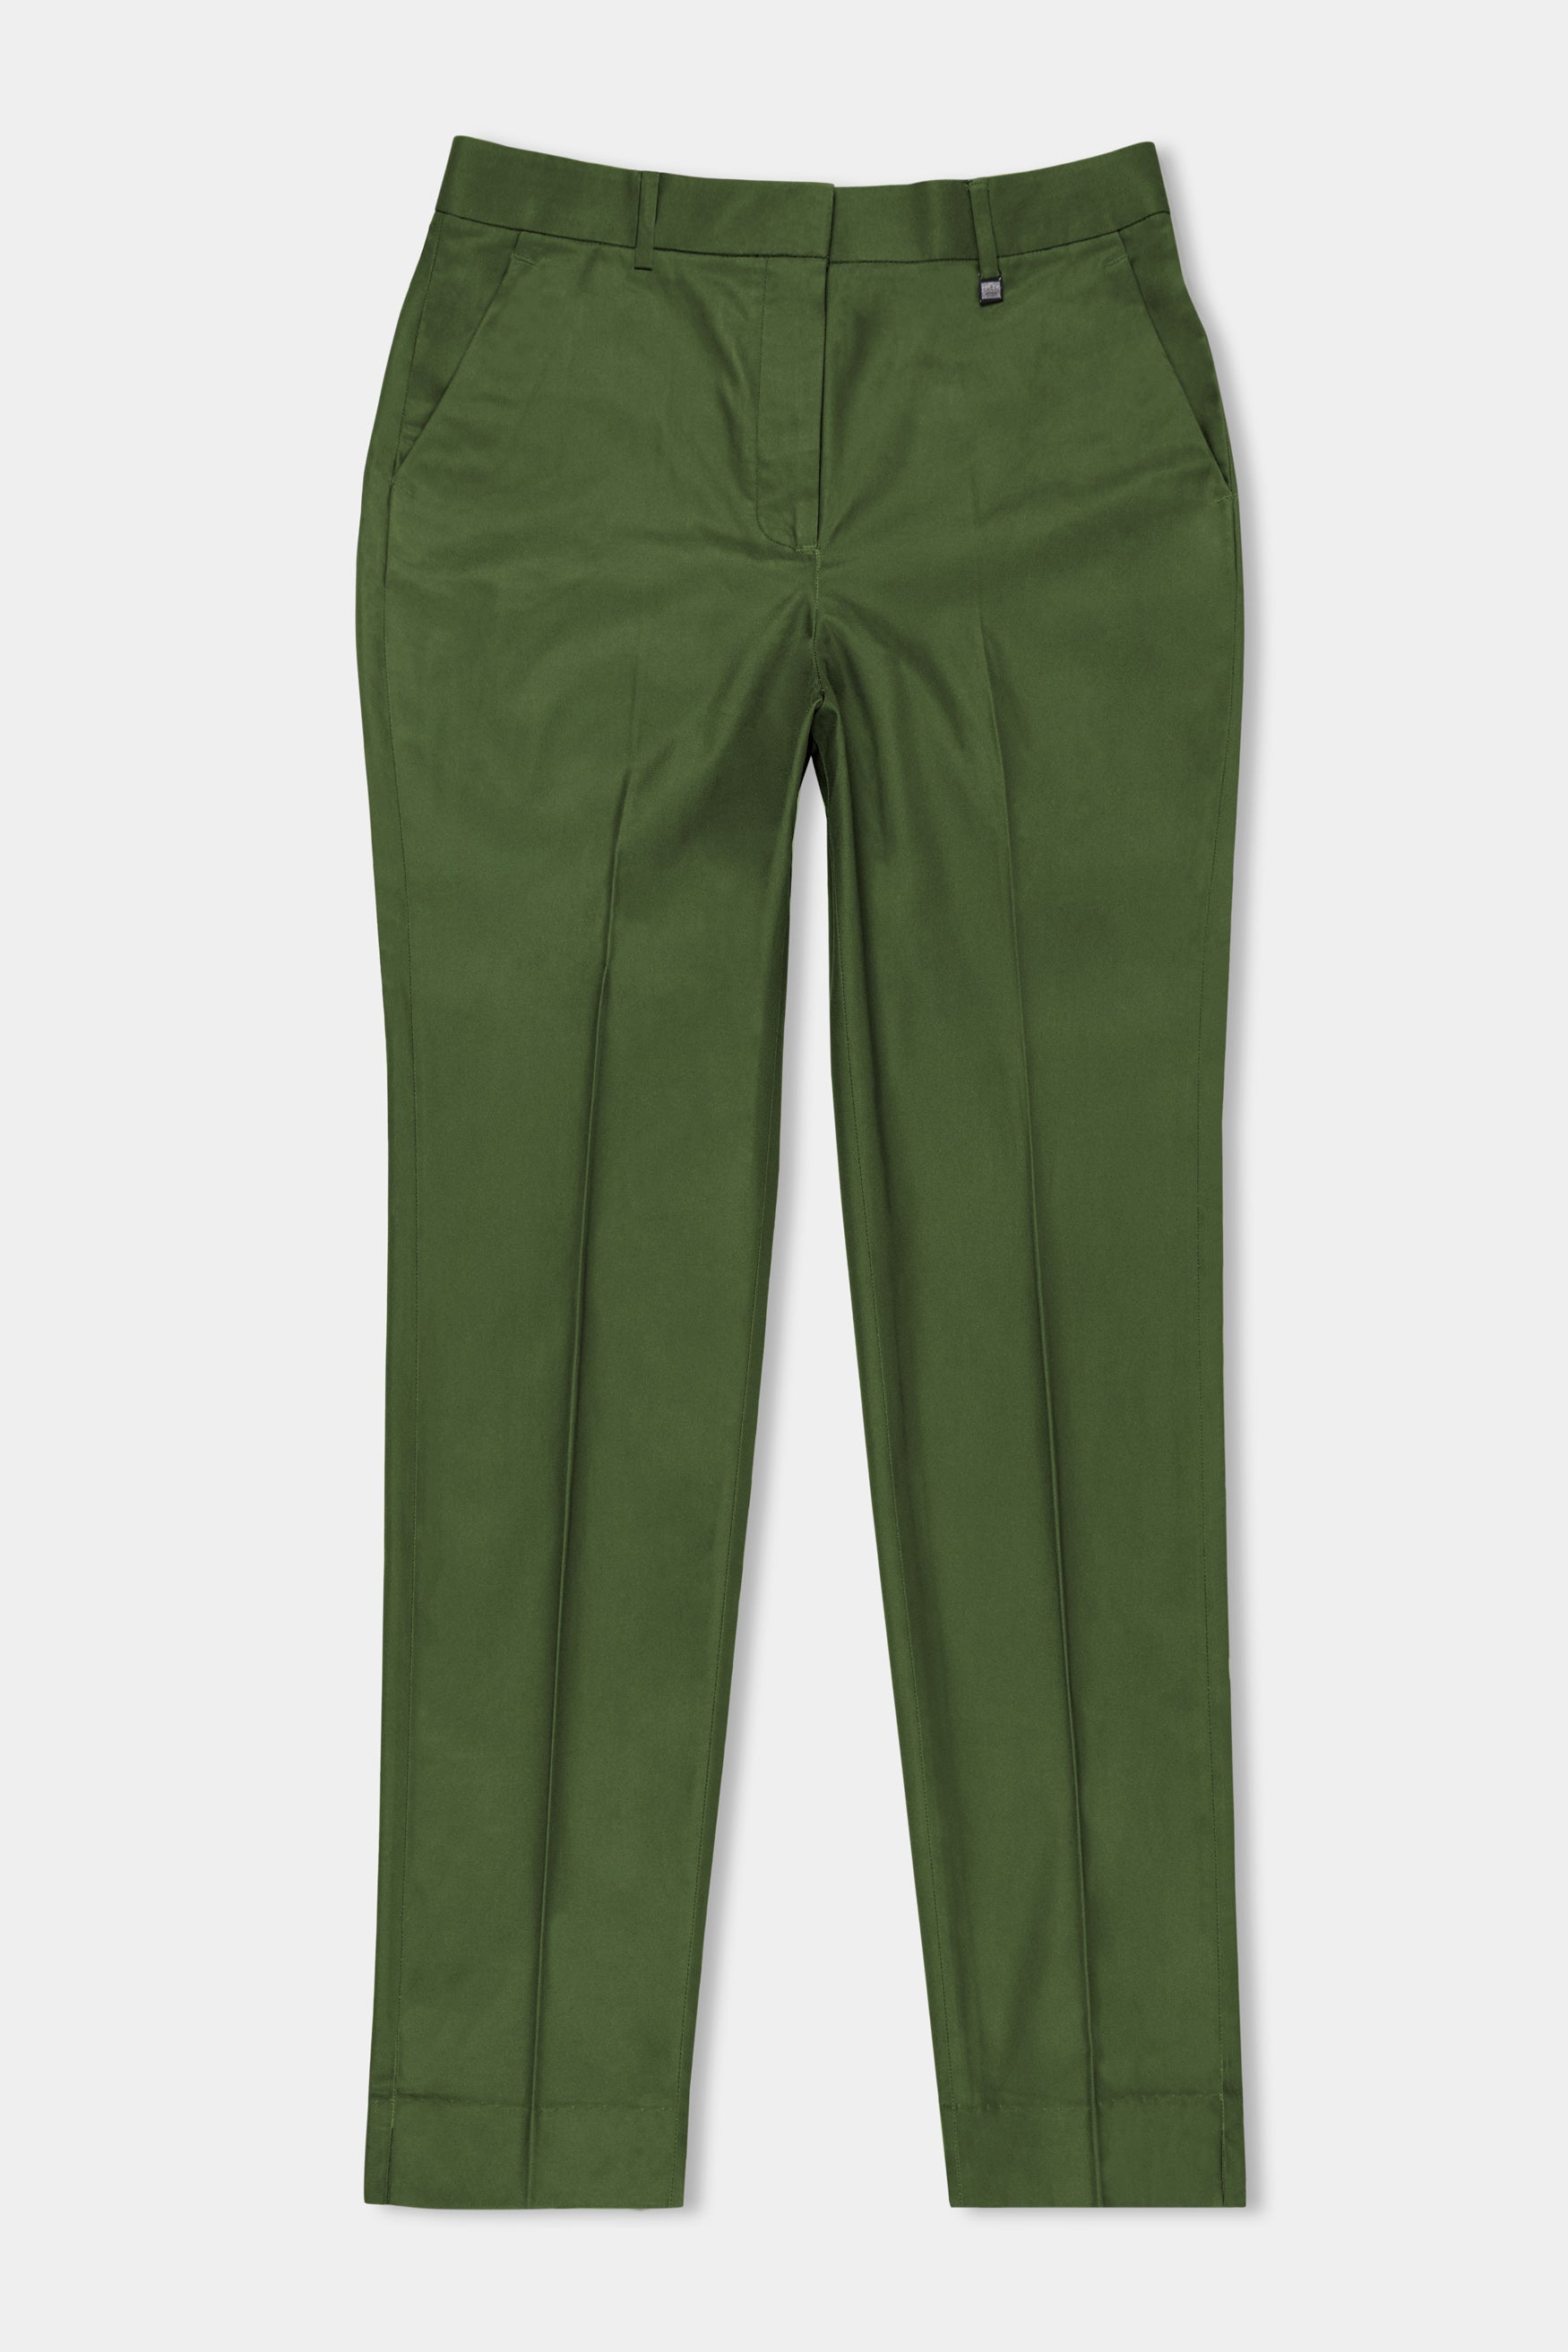 French Laundry Green Casual Pants for Women